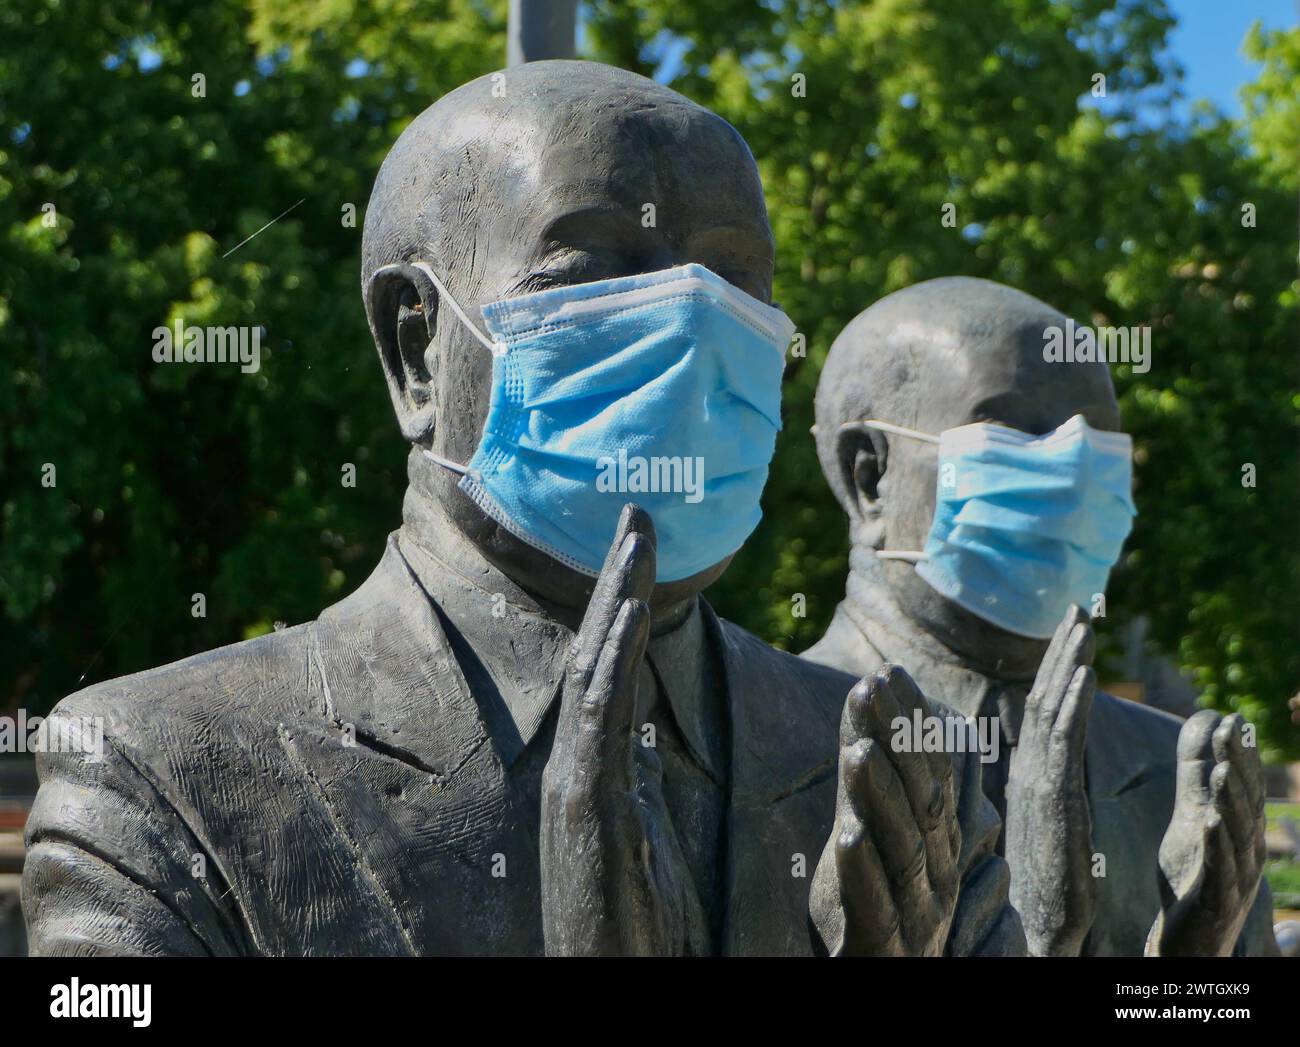 Metal sculptures in Pforzheim, Germany, featuring masks during the Corona pandemic Stock Photo